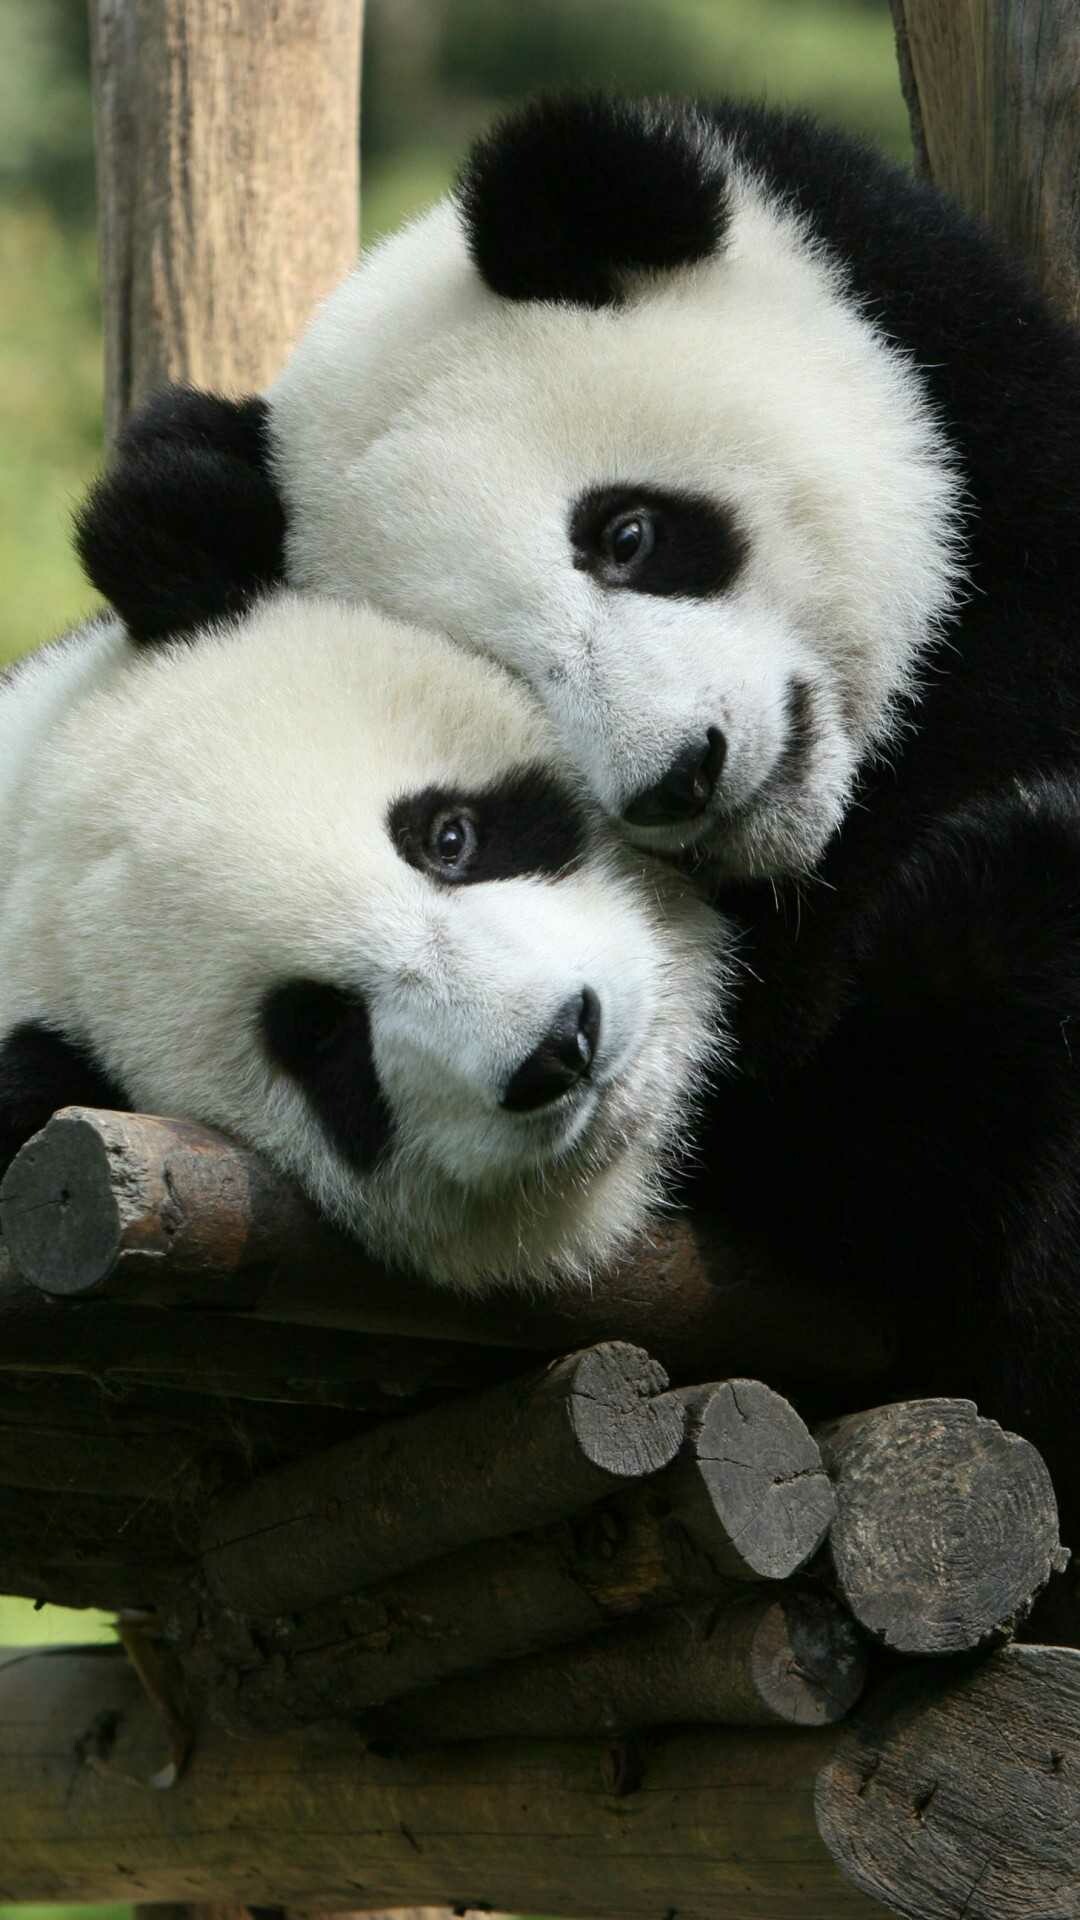 Panda: Giant pandas, Identified by their distinctive black and white coloring. 1080x1920 Full HD Wallpaper.